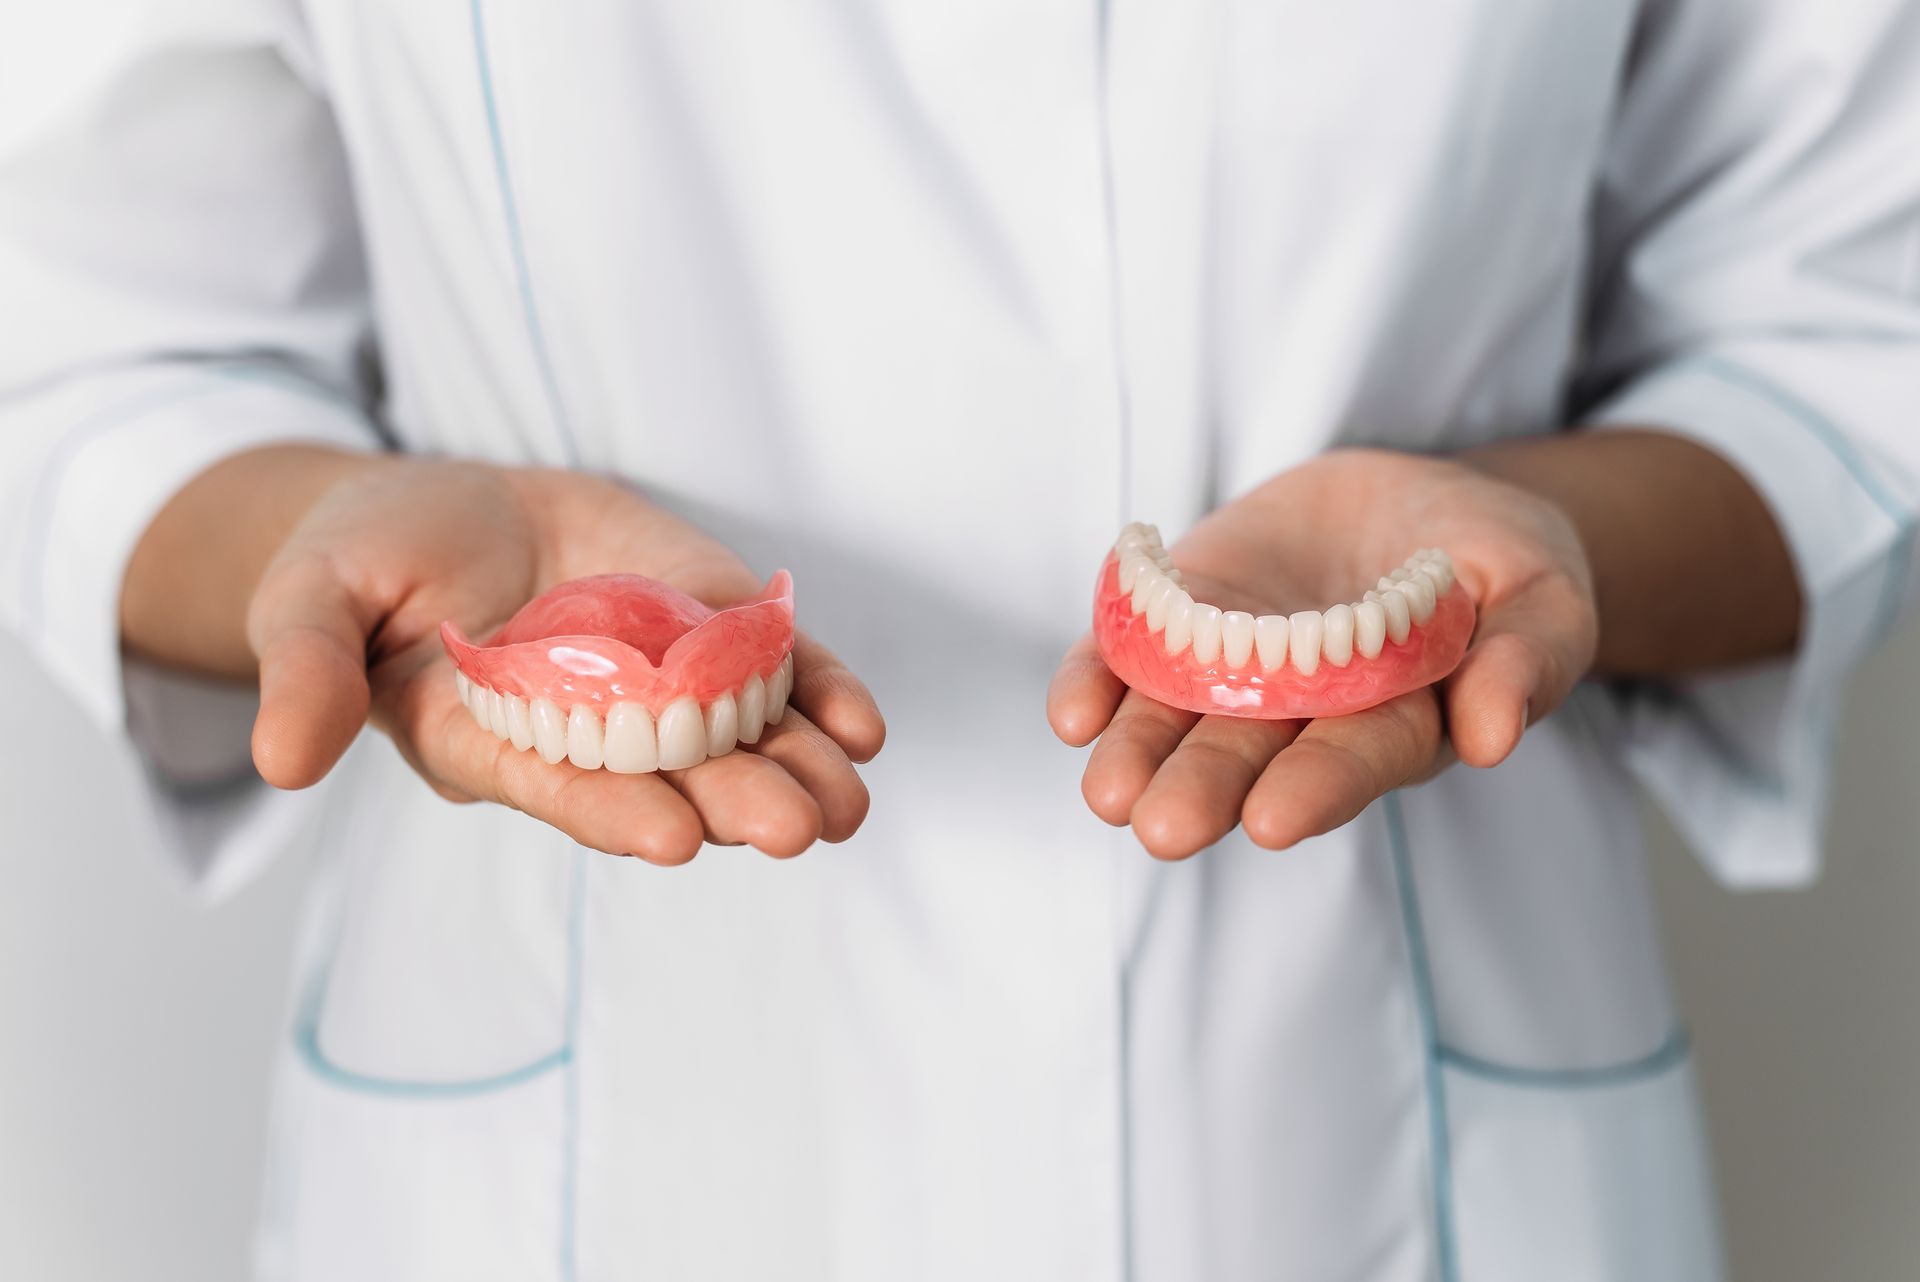 A dentist is holding two dentures in her hands.